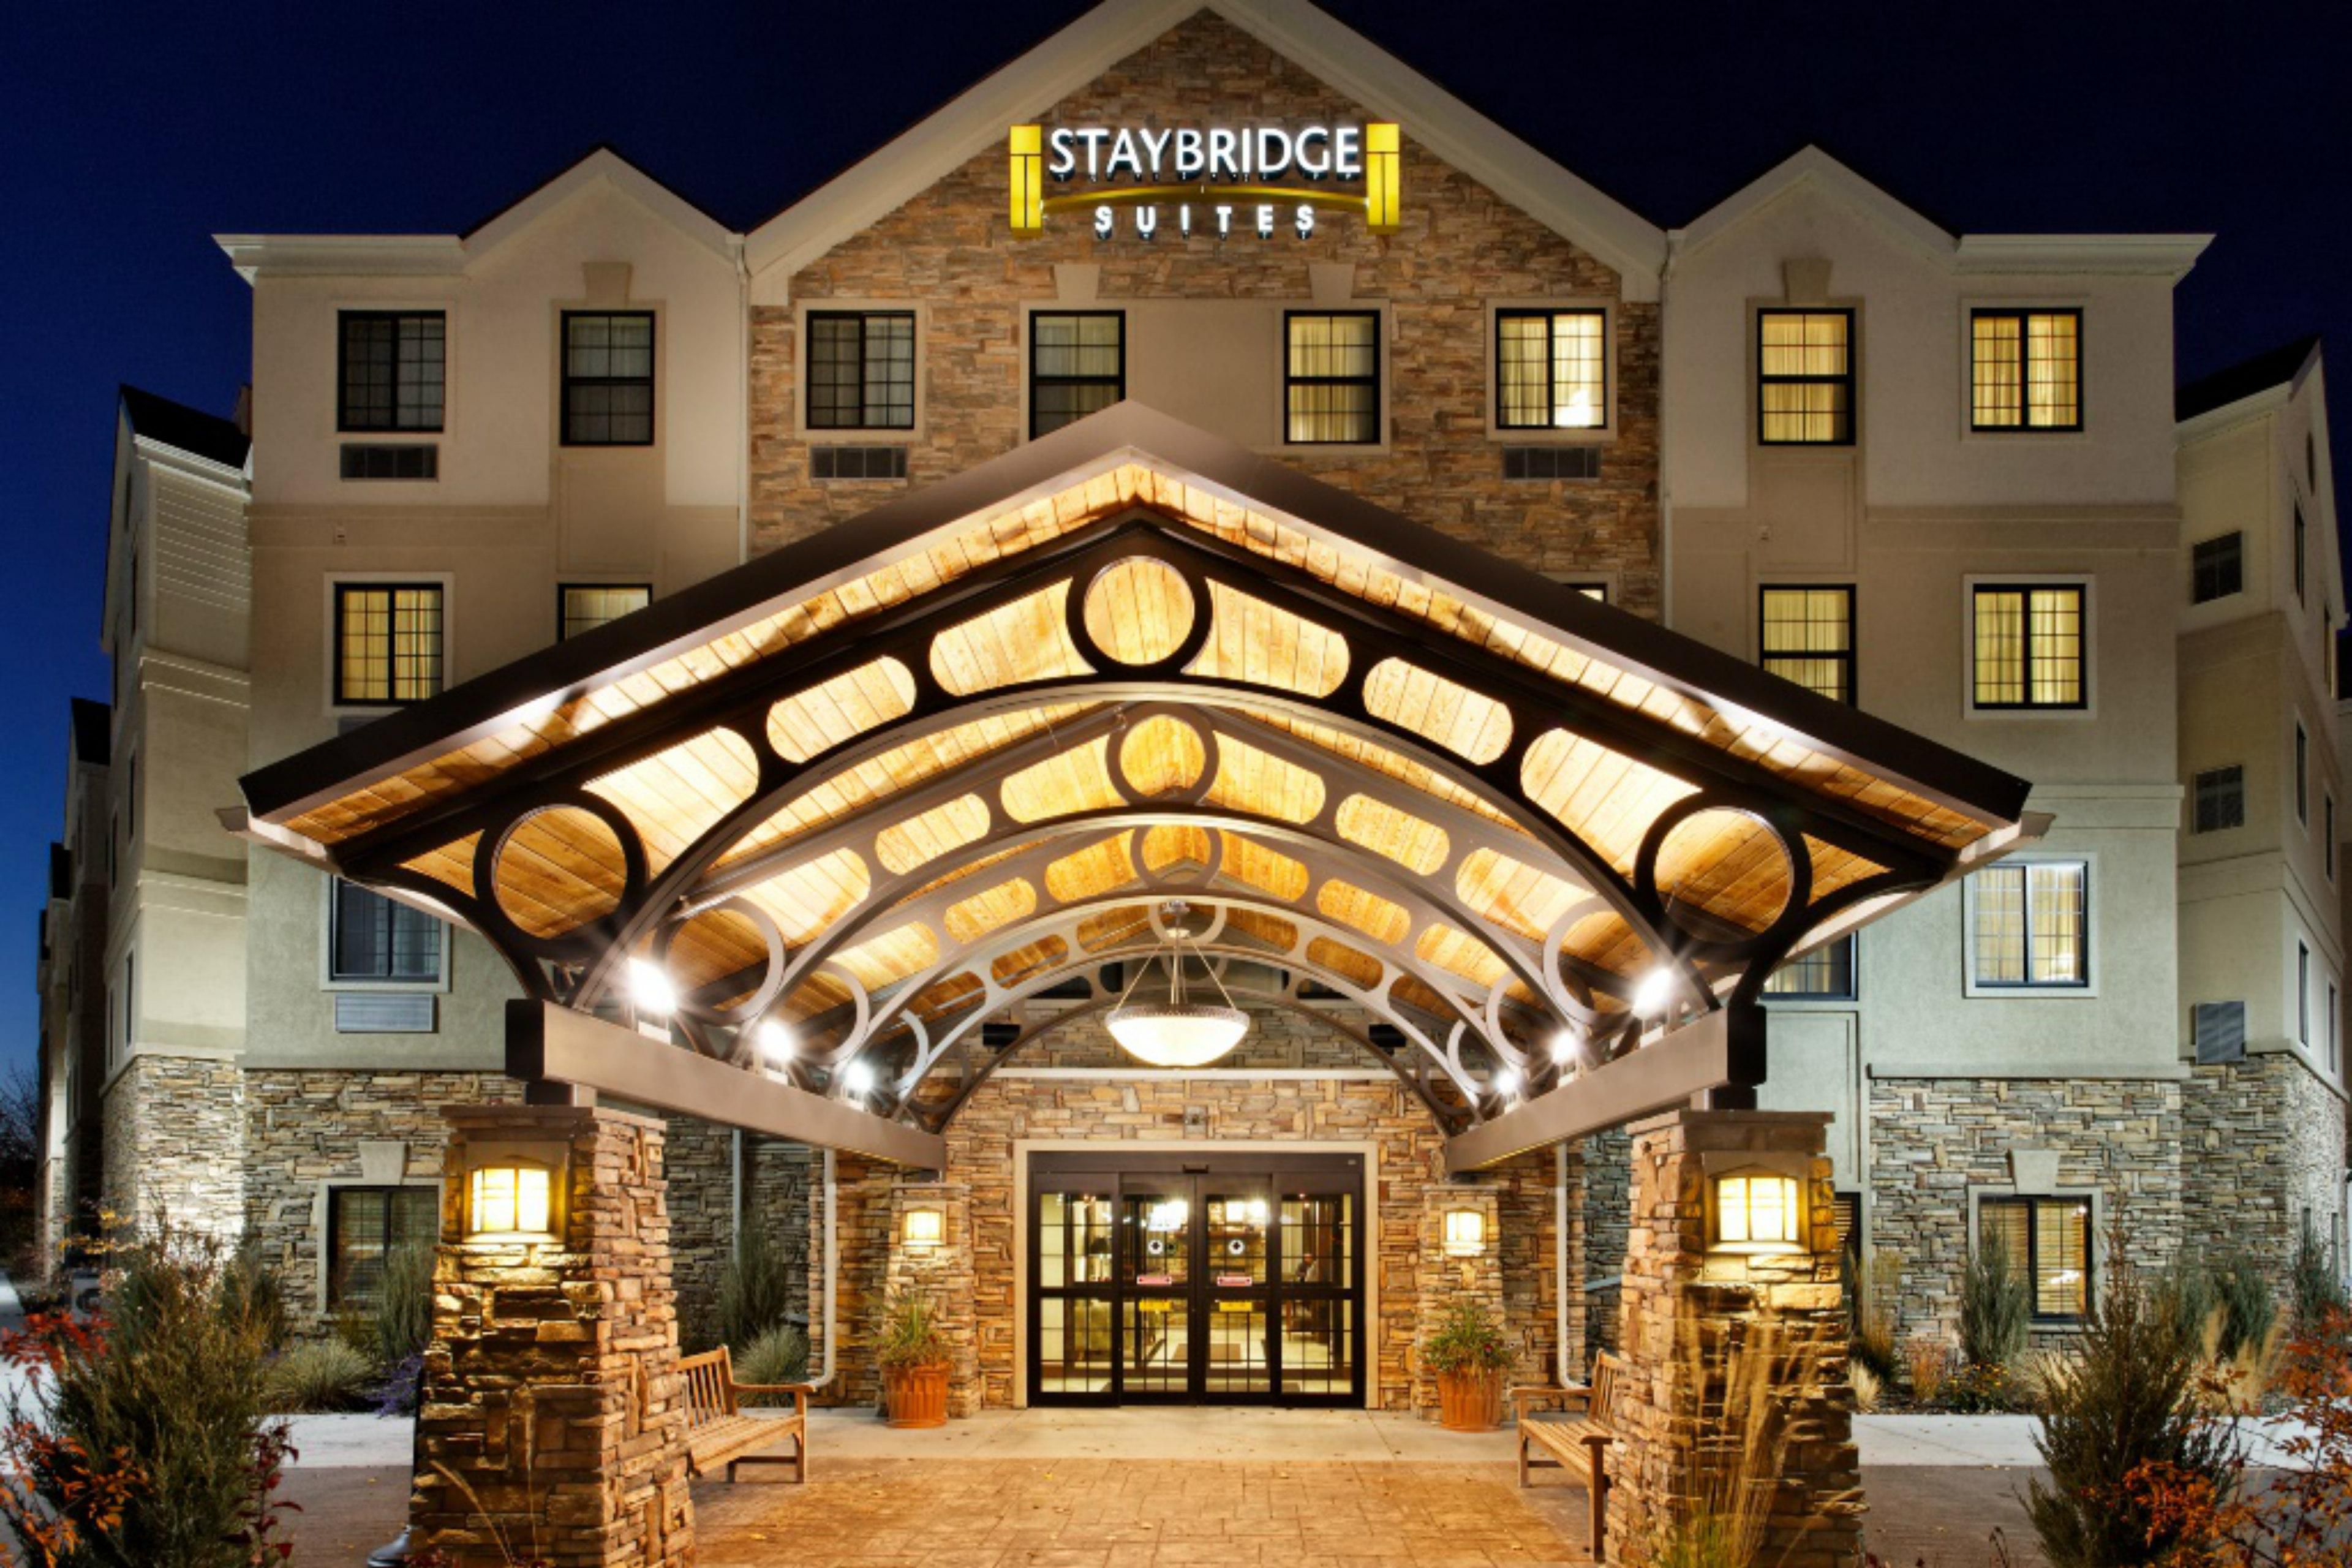 Feel at home at our all-suites hotel in Mt. Juliet, close to shopping, dining, and entertainment at the Providence Marketplace. We are right off Interstate 40, exits 226 and 226 A/B on Belinda Parkway, which takes you to all the major attractions in the Mt. Juliet and Nashville areas. 